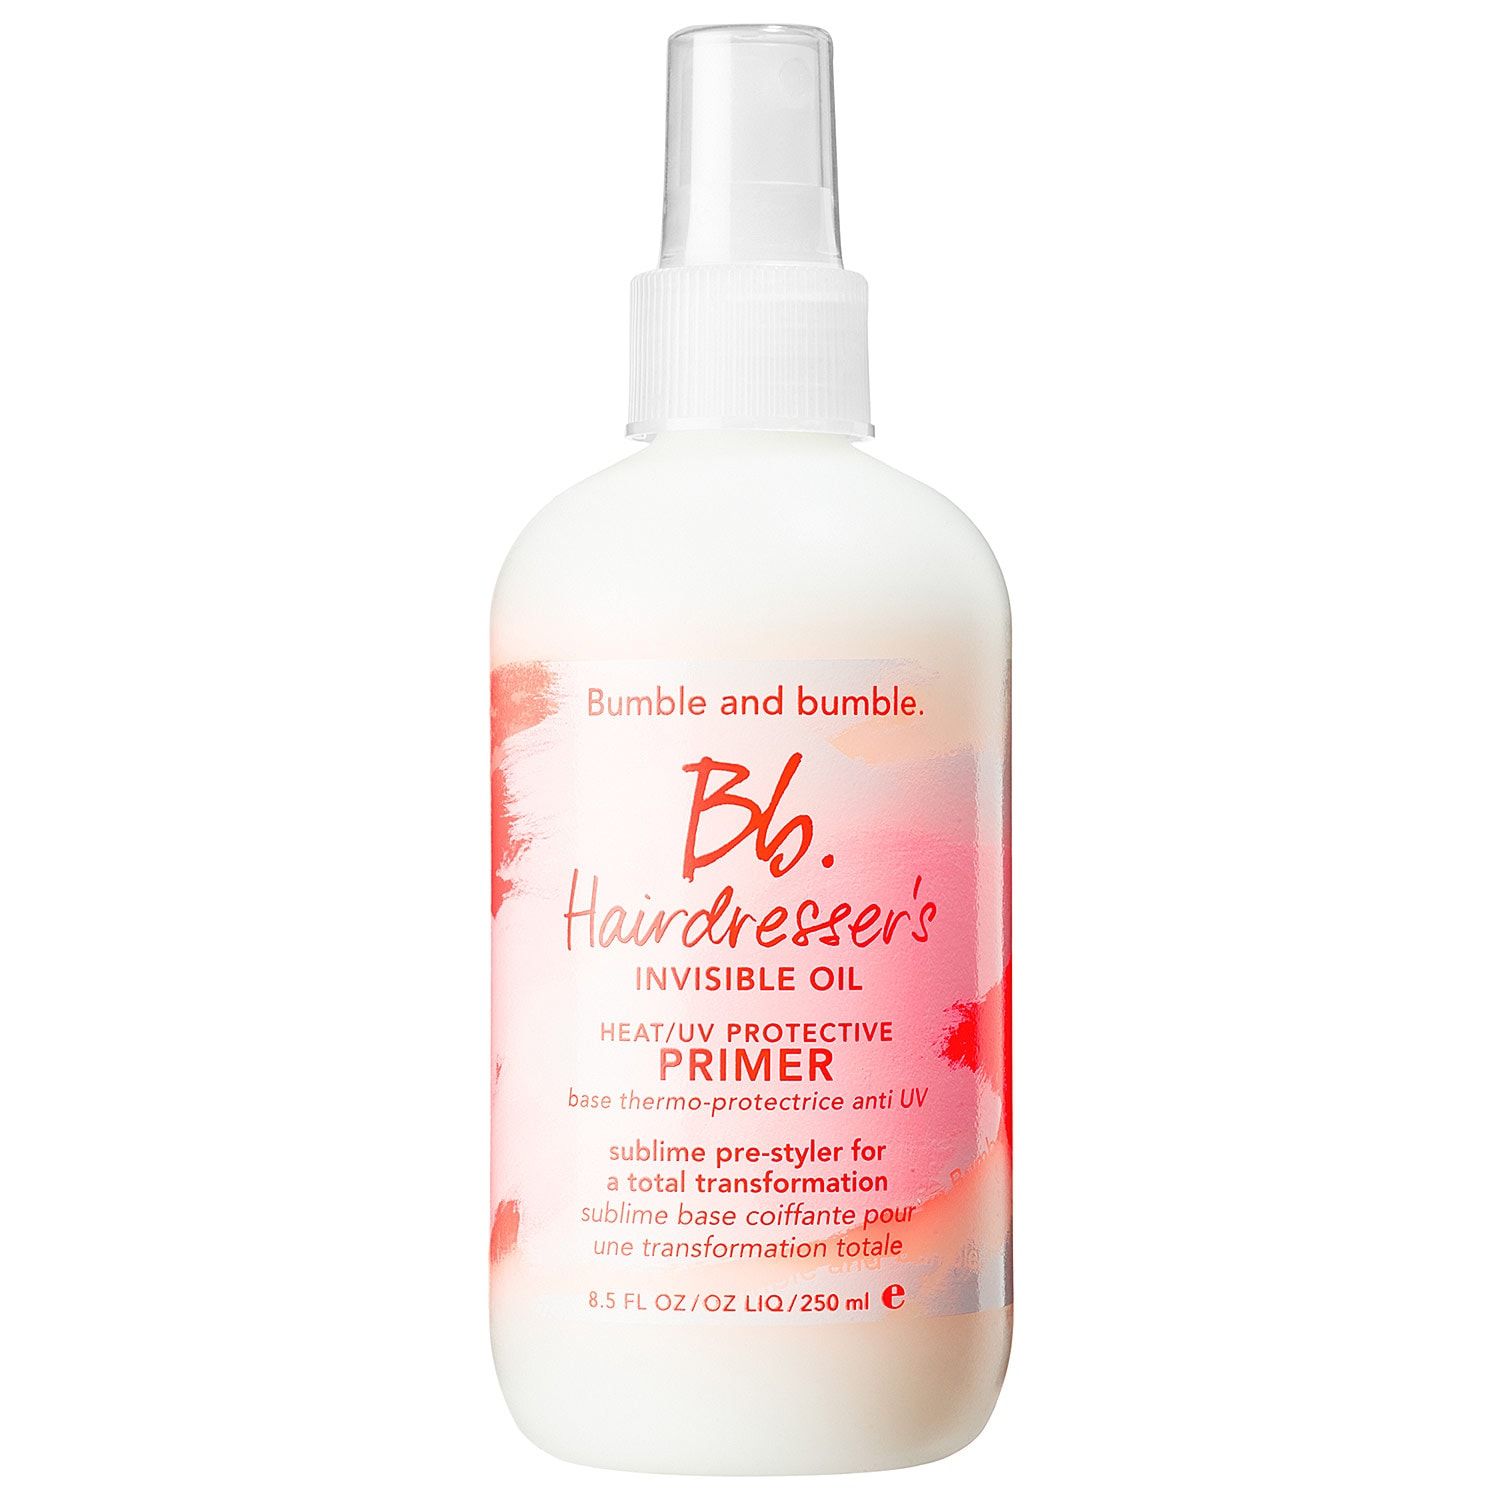 Hairdresser's invisible UV protection & heat oil primer